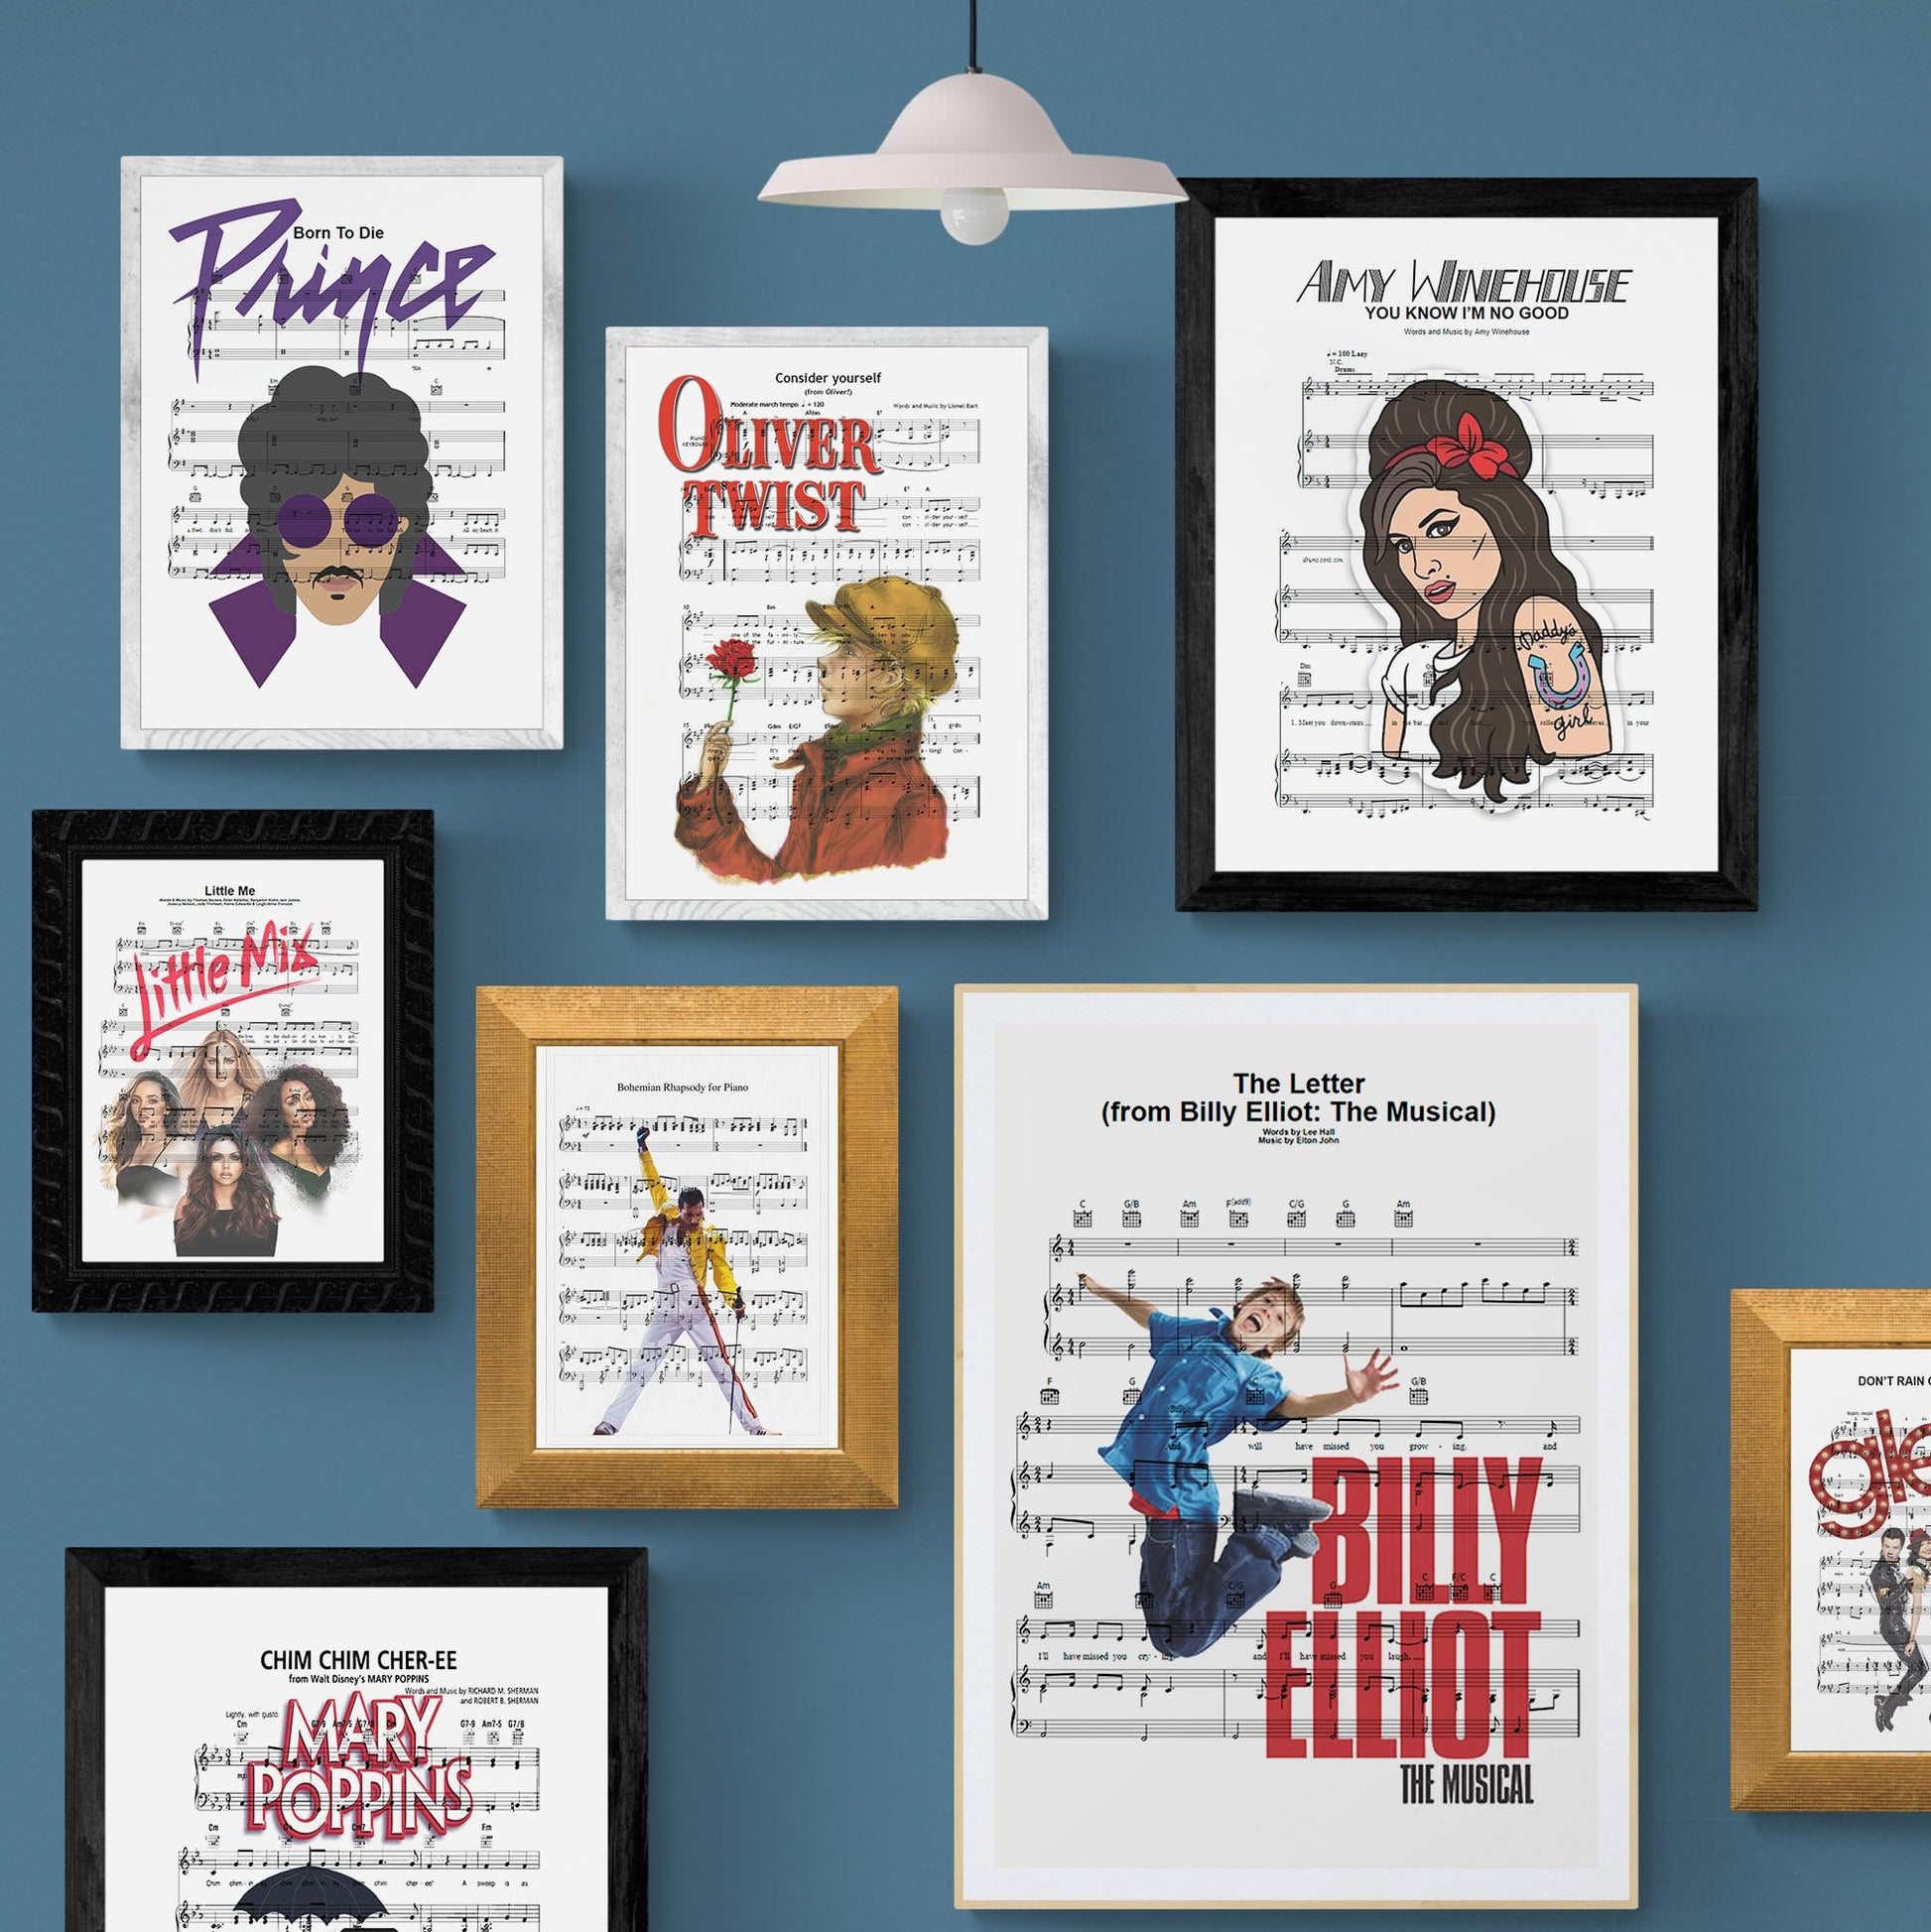 Billy Elliot Musical Theatre Print Wall Art - Billy Elliot Electricity music sheet print - Home or gift idea - A4 Print  This will make a great print in your home or just for any Billy Elliot fan!  Perfect gift idea for birthdays, Christmas or any special occasion.